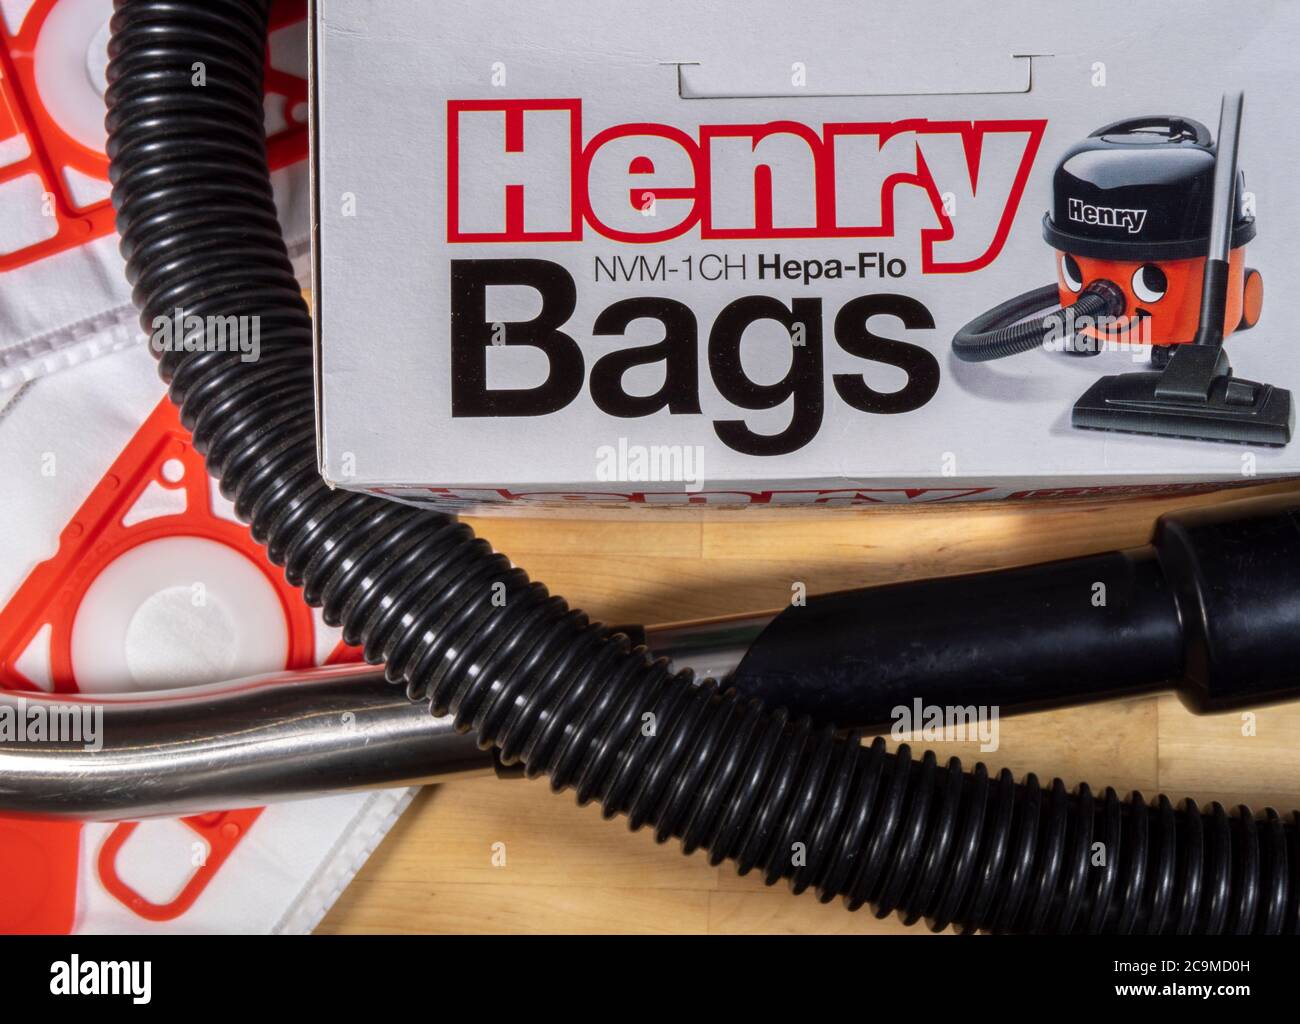 Henry vacuum cleaner filter bags – overhead view of a retail box with two bags outside, together with a vacuum hose. Stock Photo